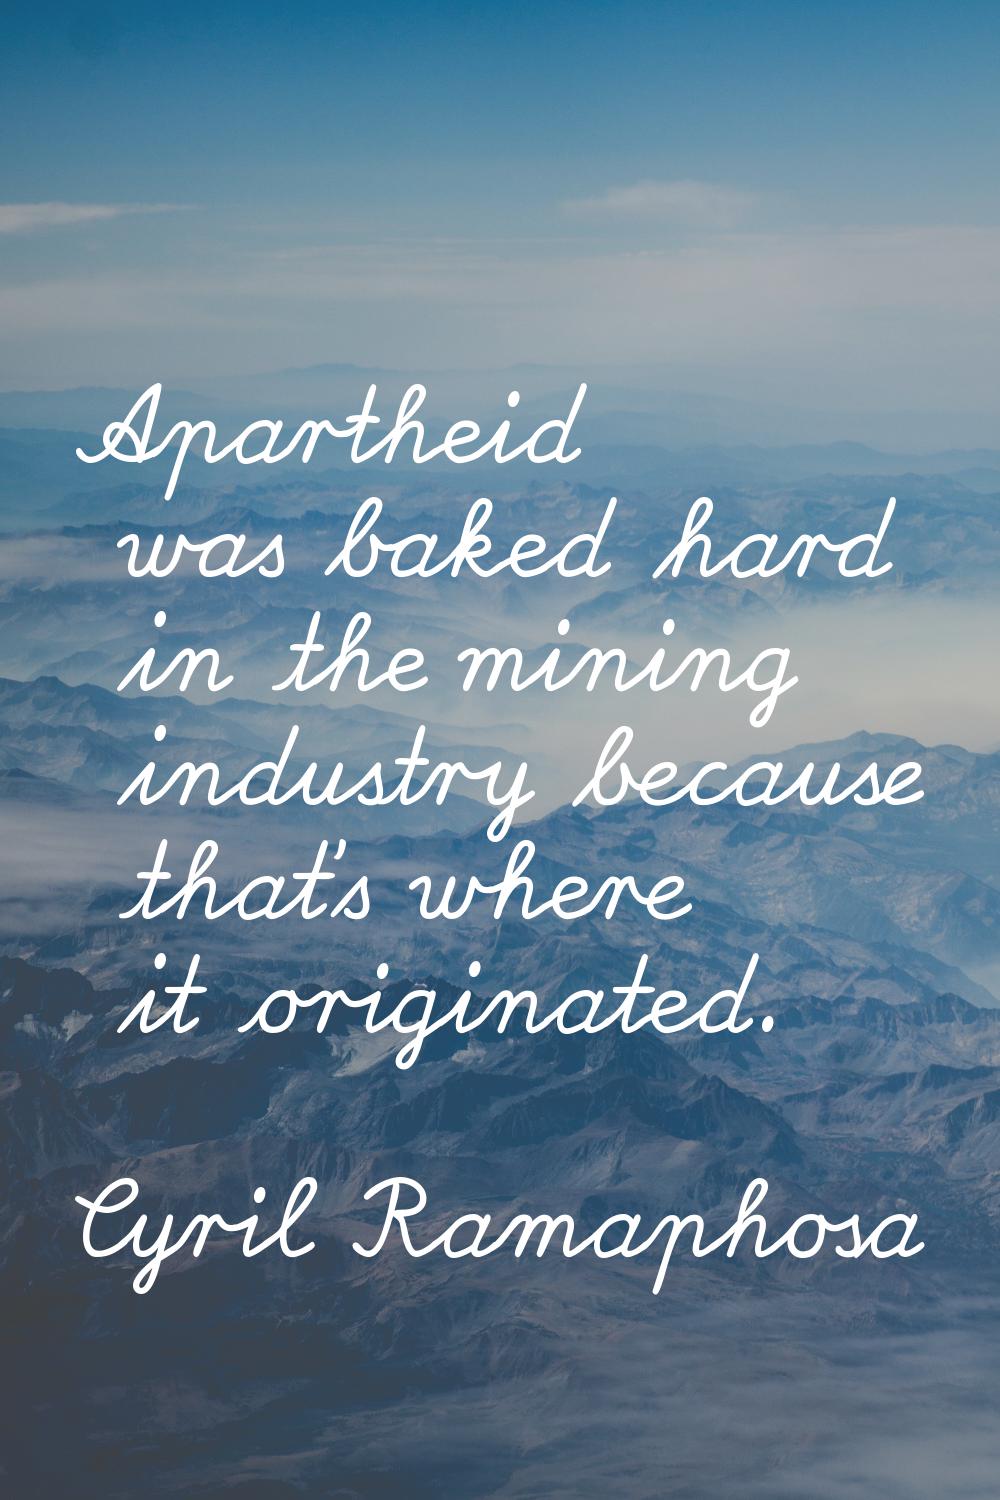 Apartheid was baked hard in the mining industry because that's where it originated.